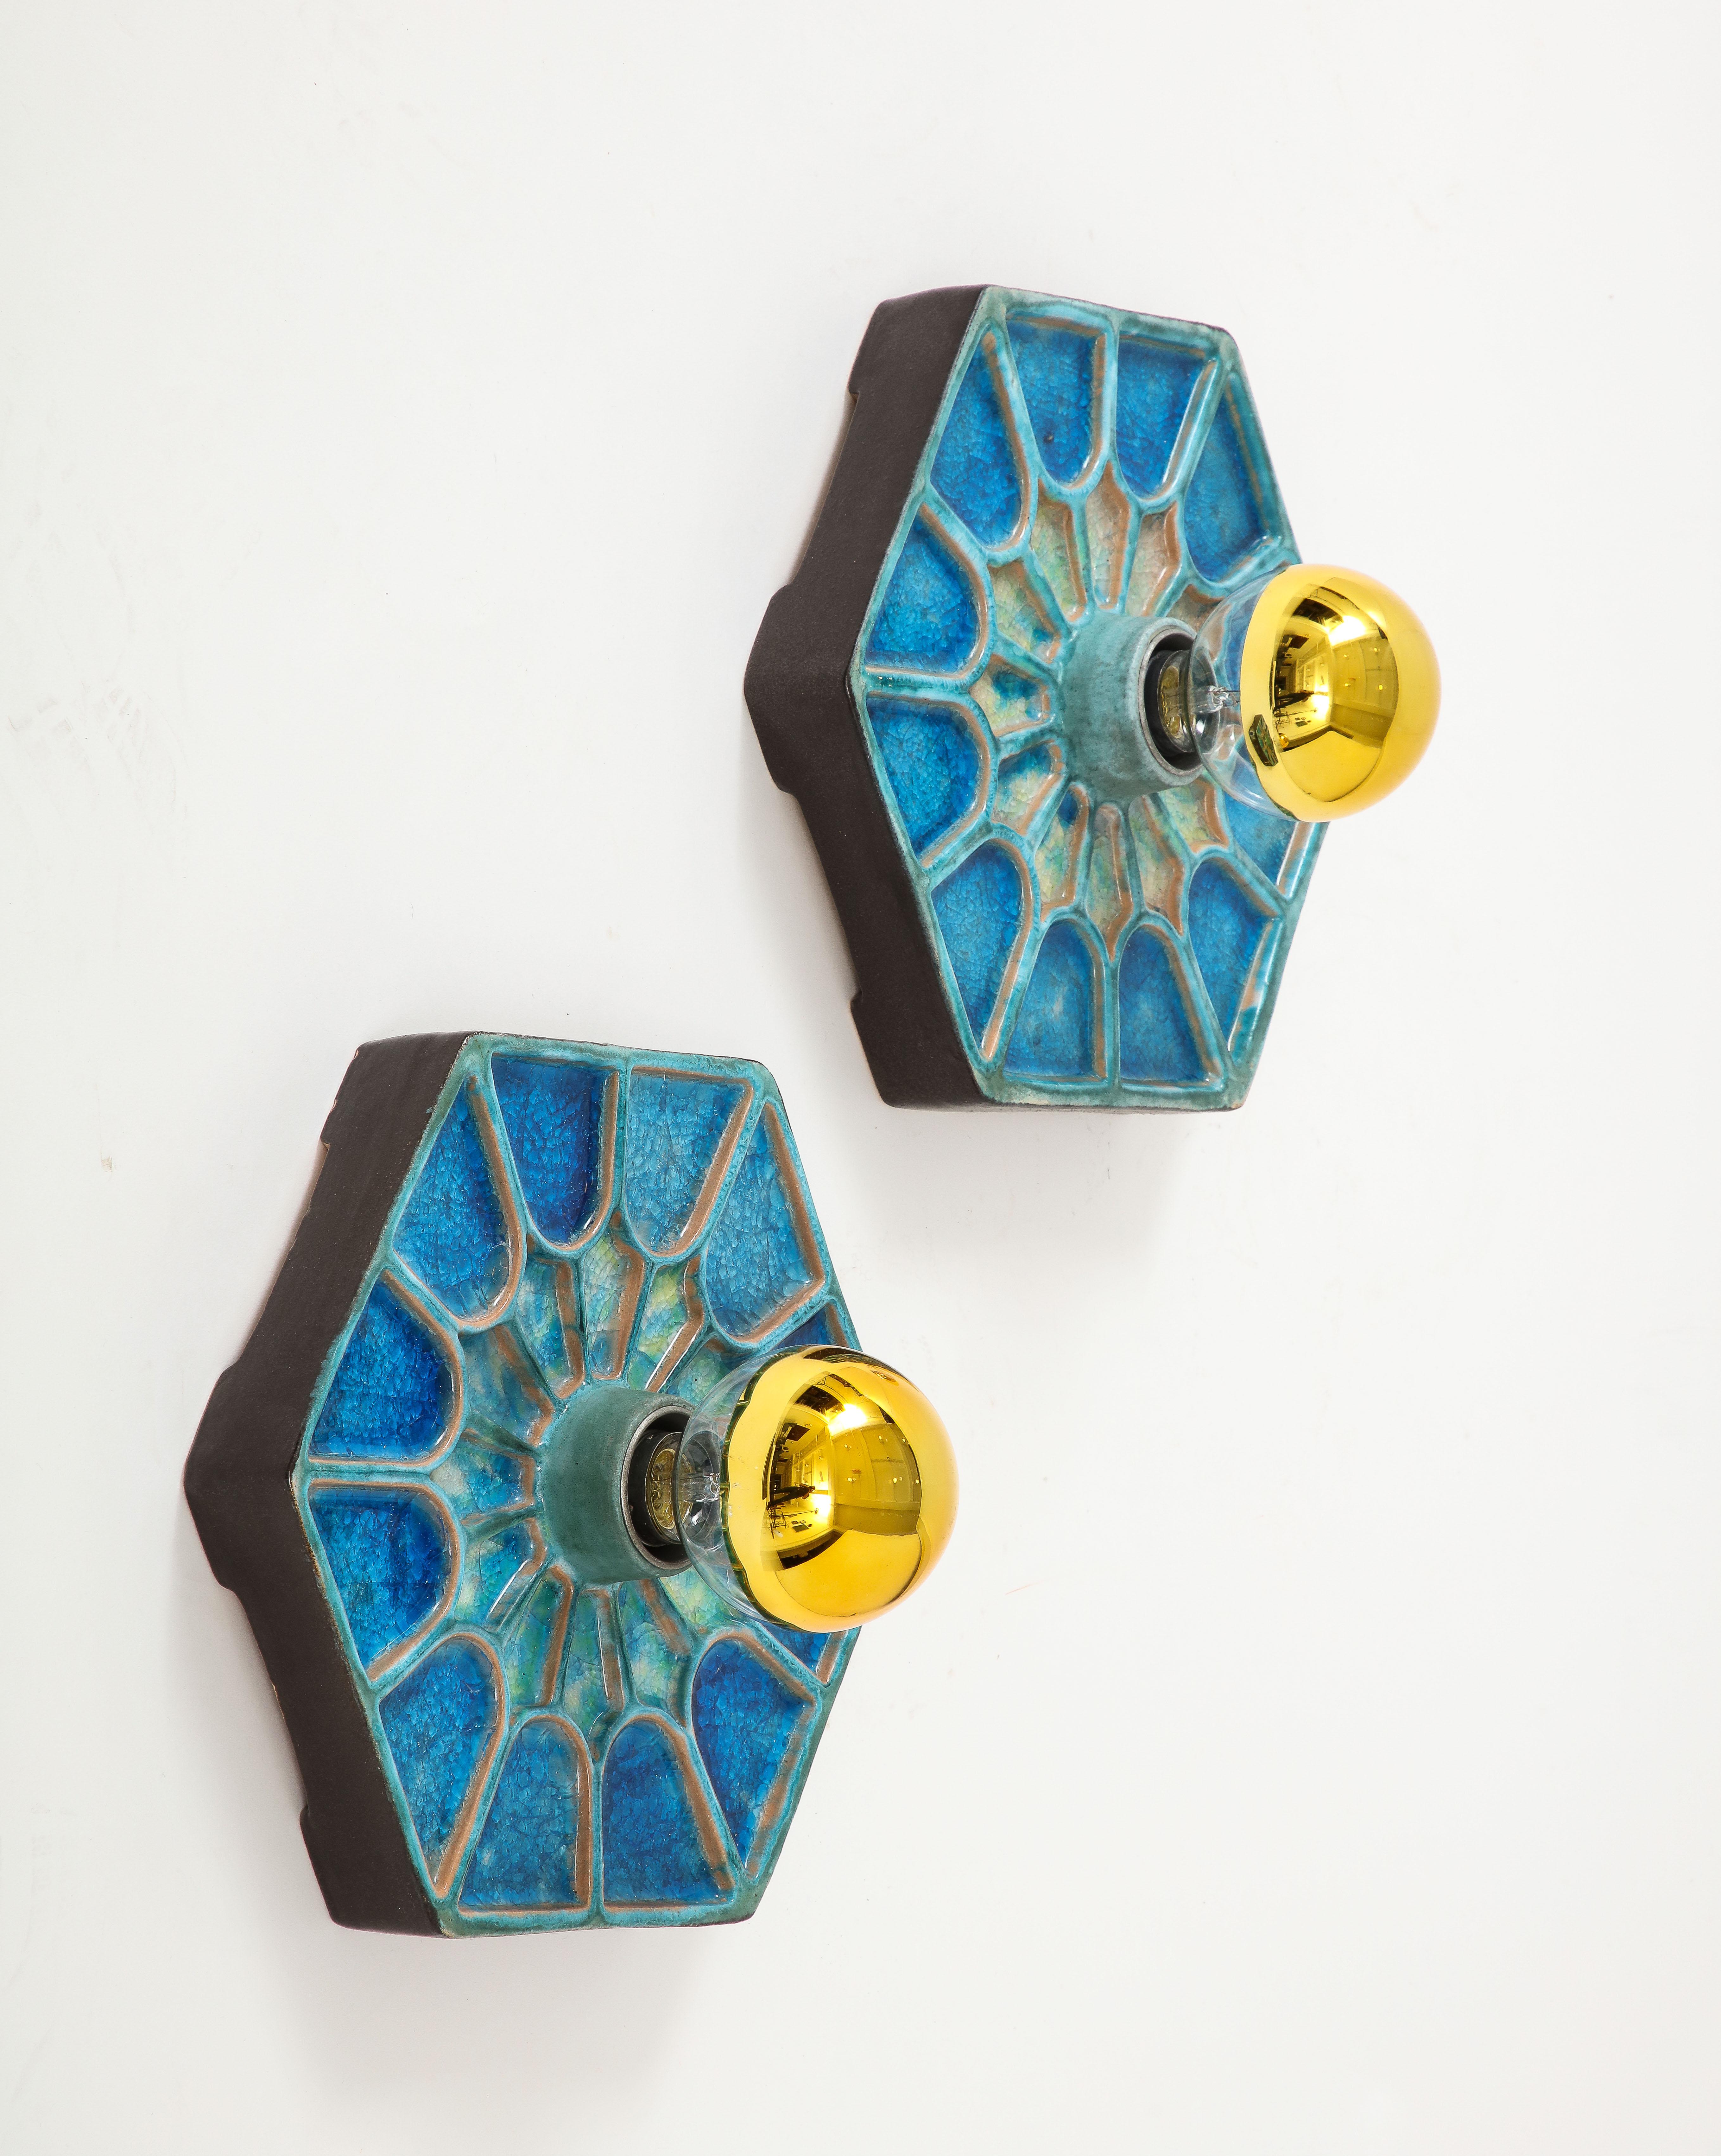 Unique pair of vibrant shades of blue ceramic wall lights. 
Hexagonal shape.
European sockets and wiring.